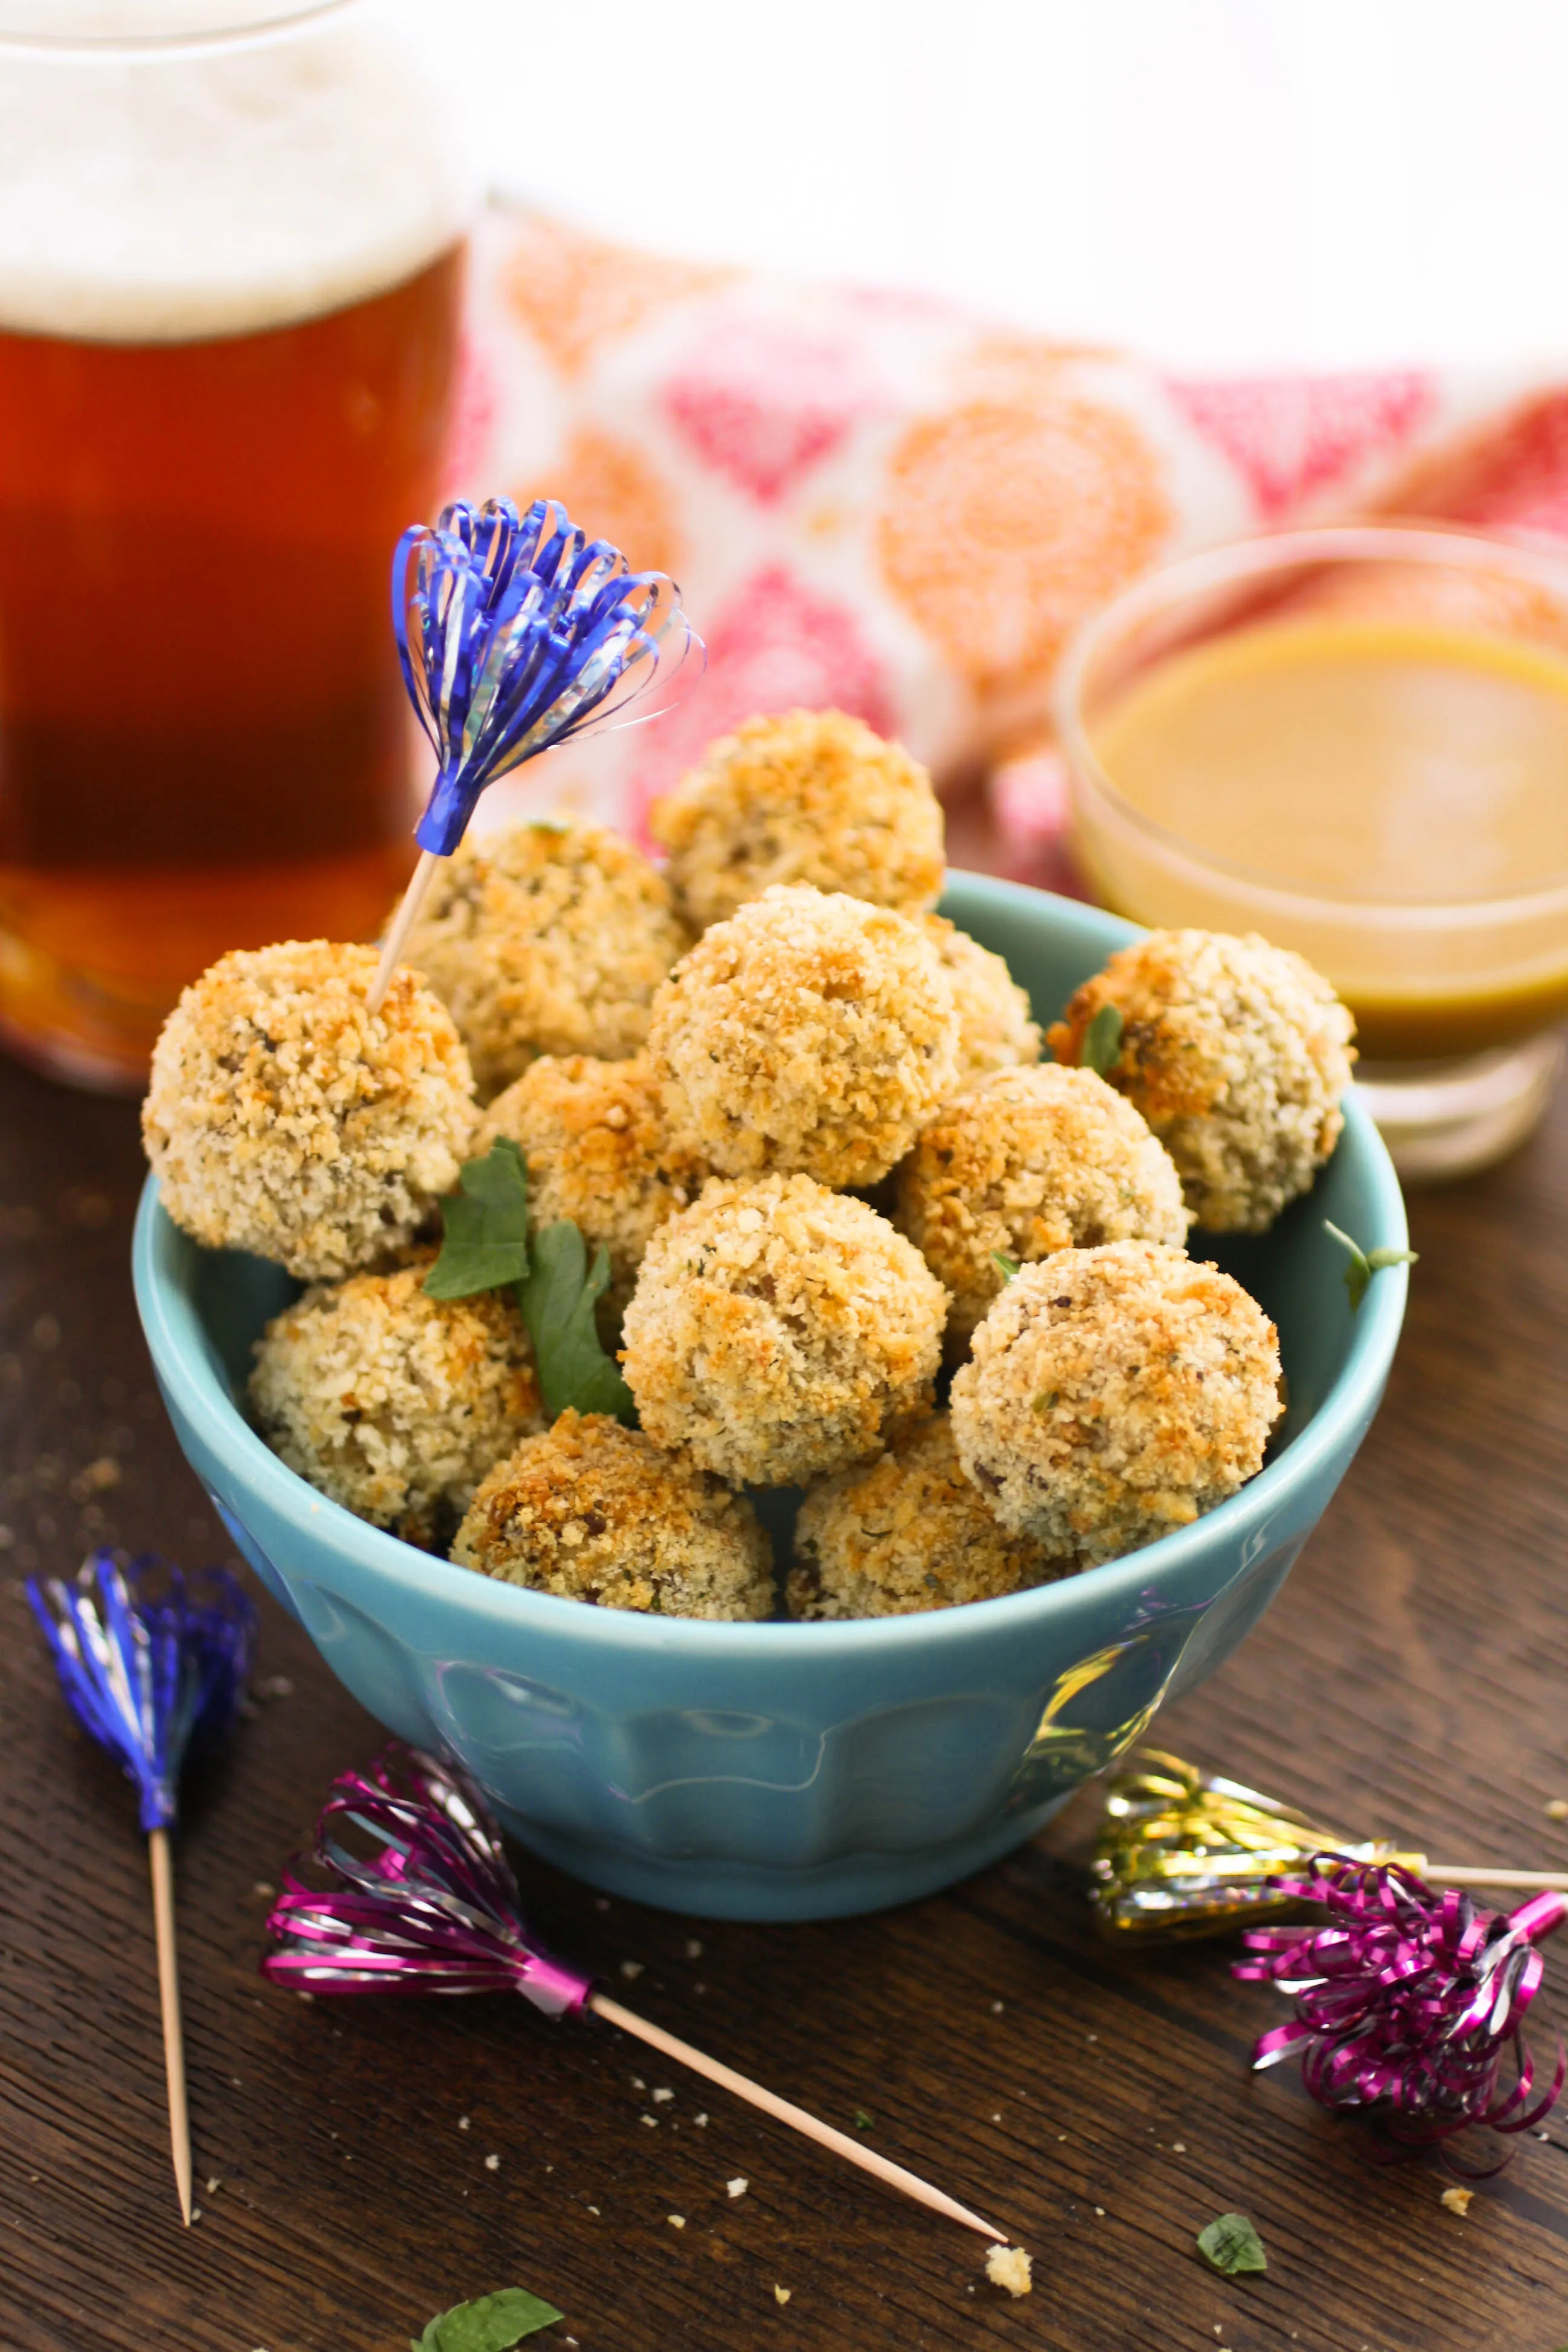 Baked Sauerkraut Balls are a fabulous snack! The flavors are fab and they bring a retro vibe to any party!